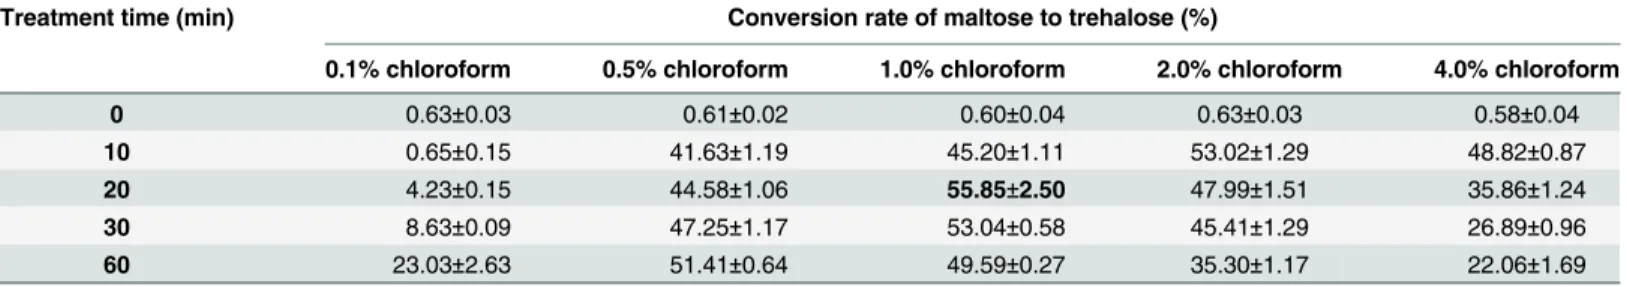 Table 2. Effects of chloroform dosageon and treatment time on the conversion rate of maltose to trehalose.